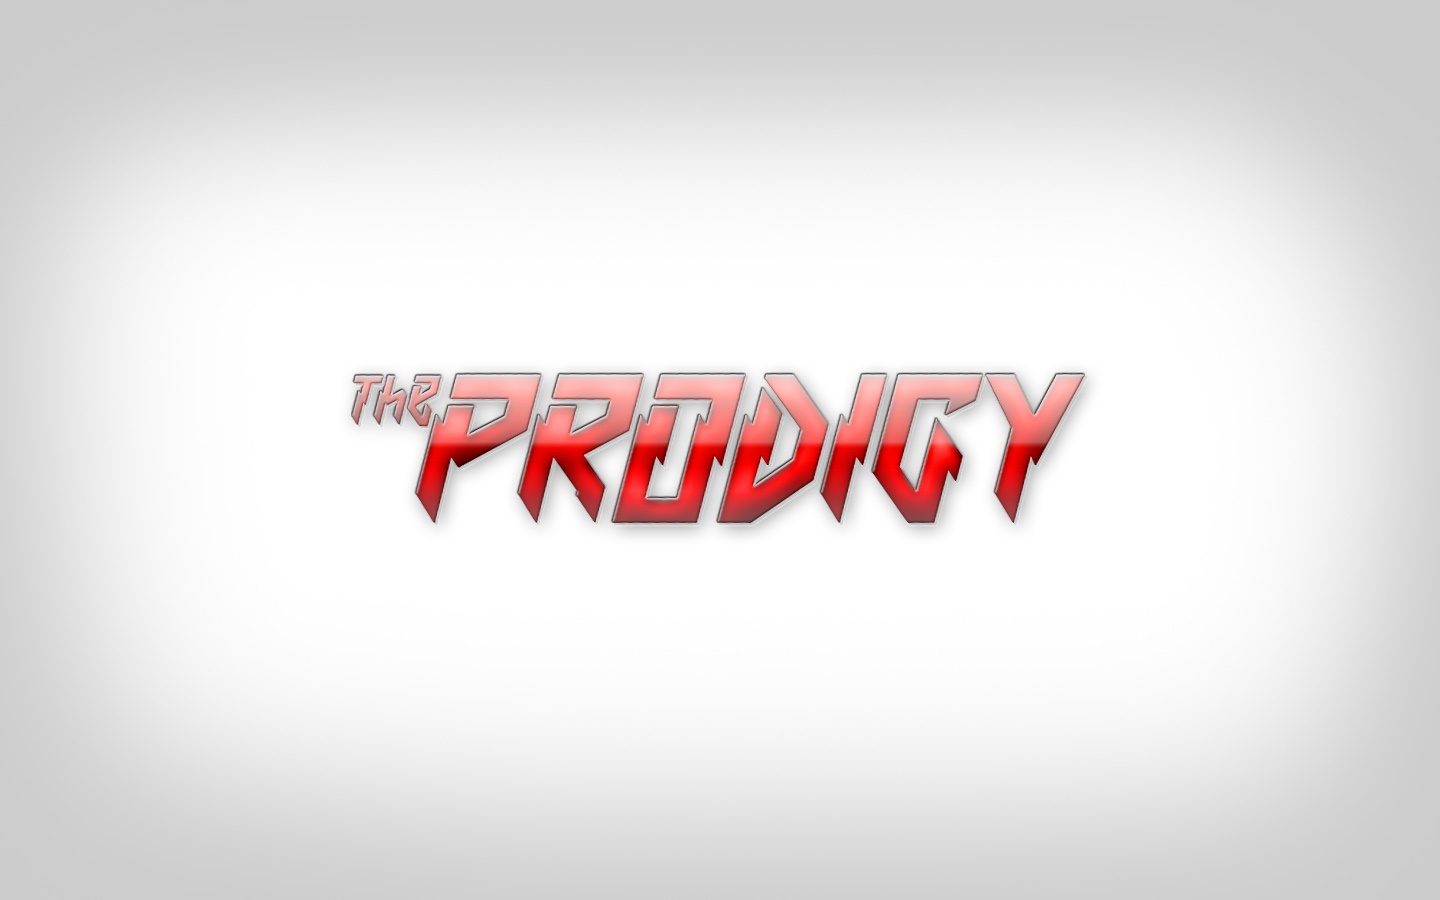 The Prodigy Logo HD and Wide Wallpapers